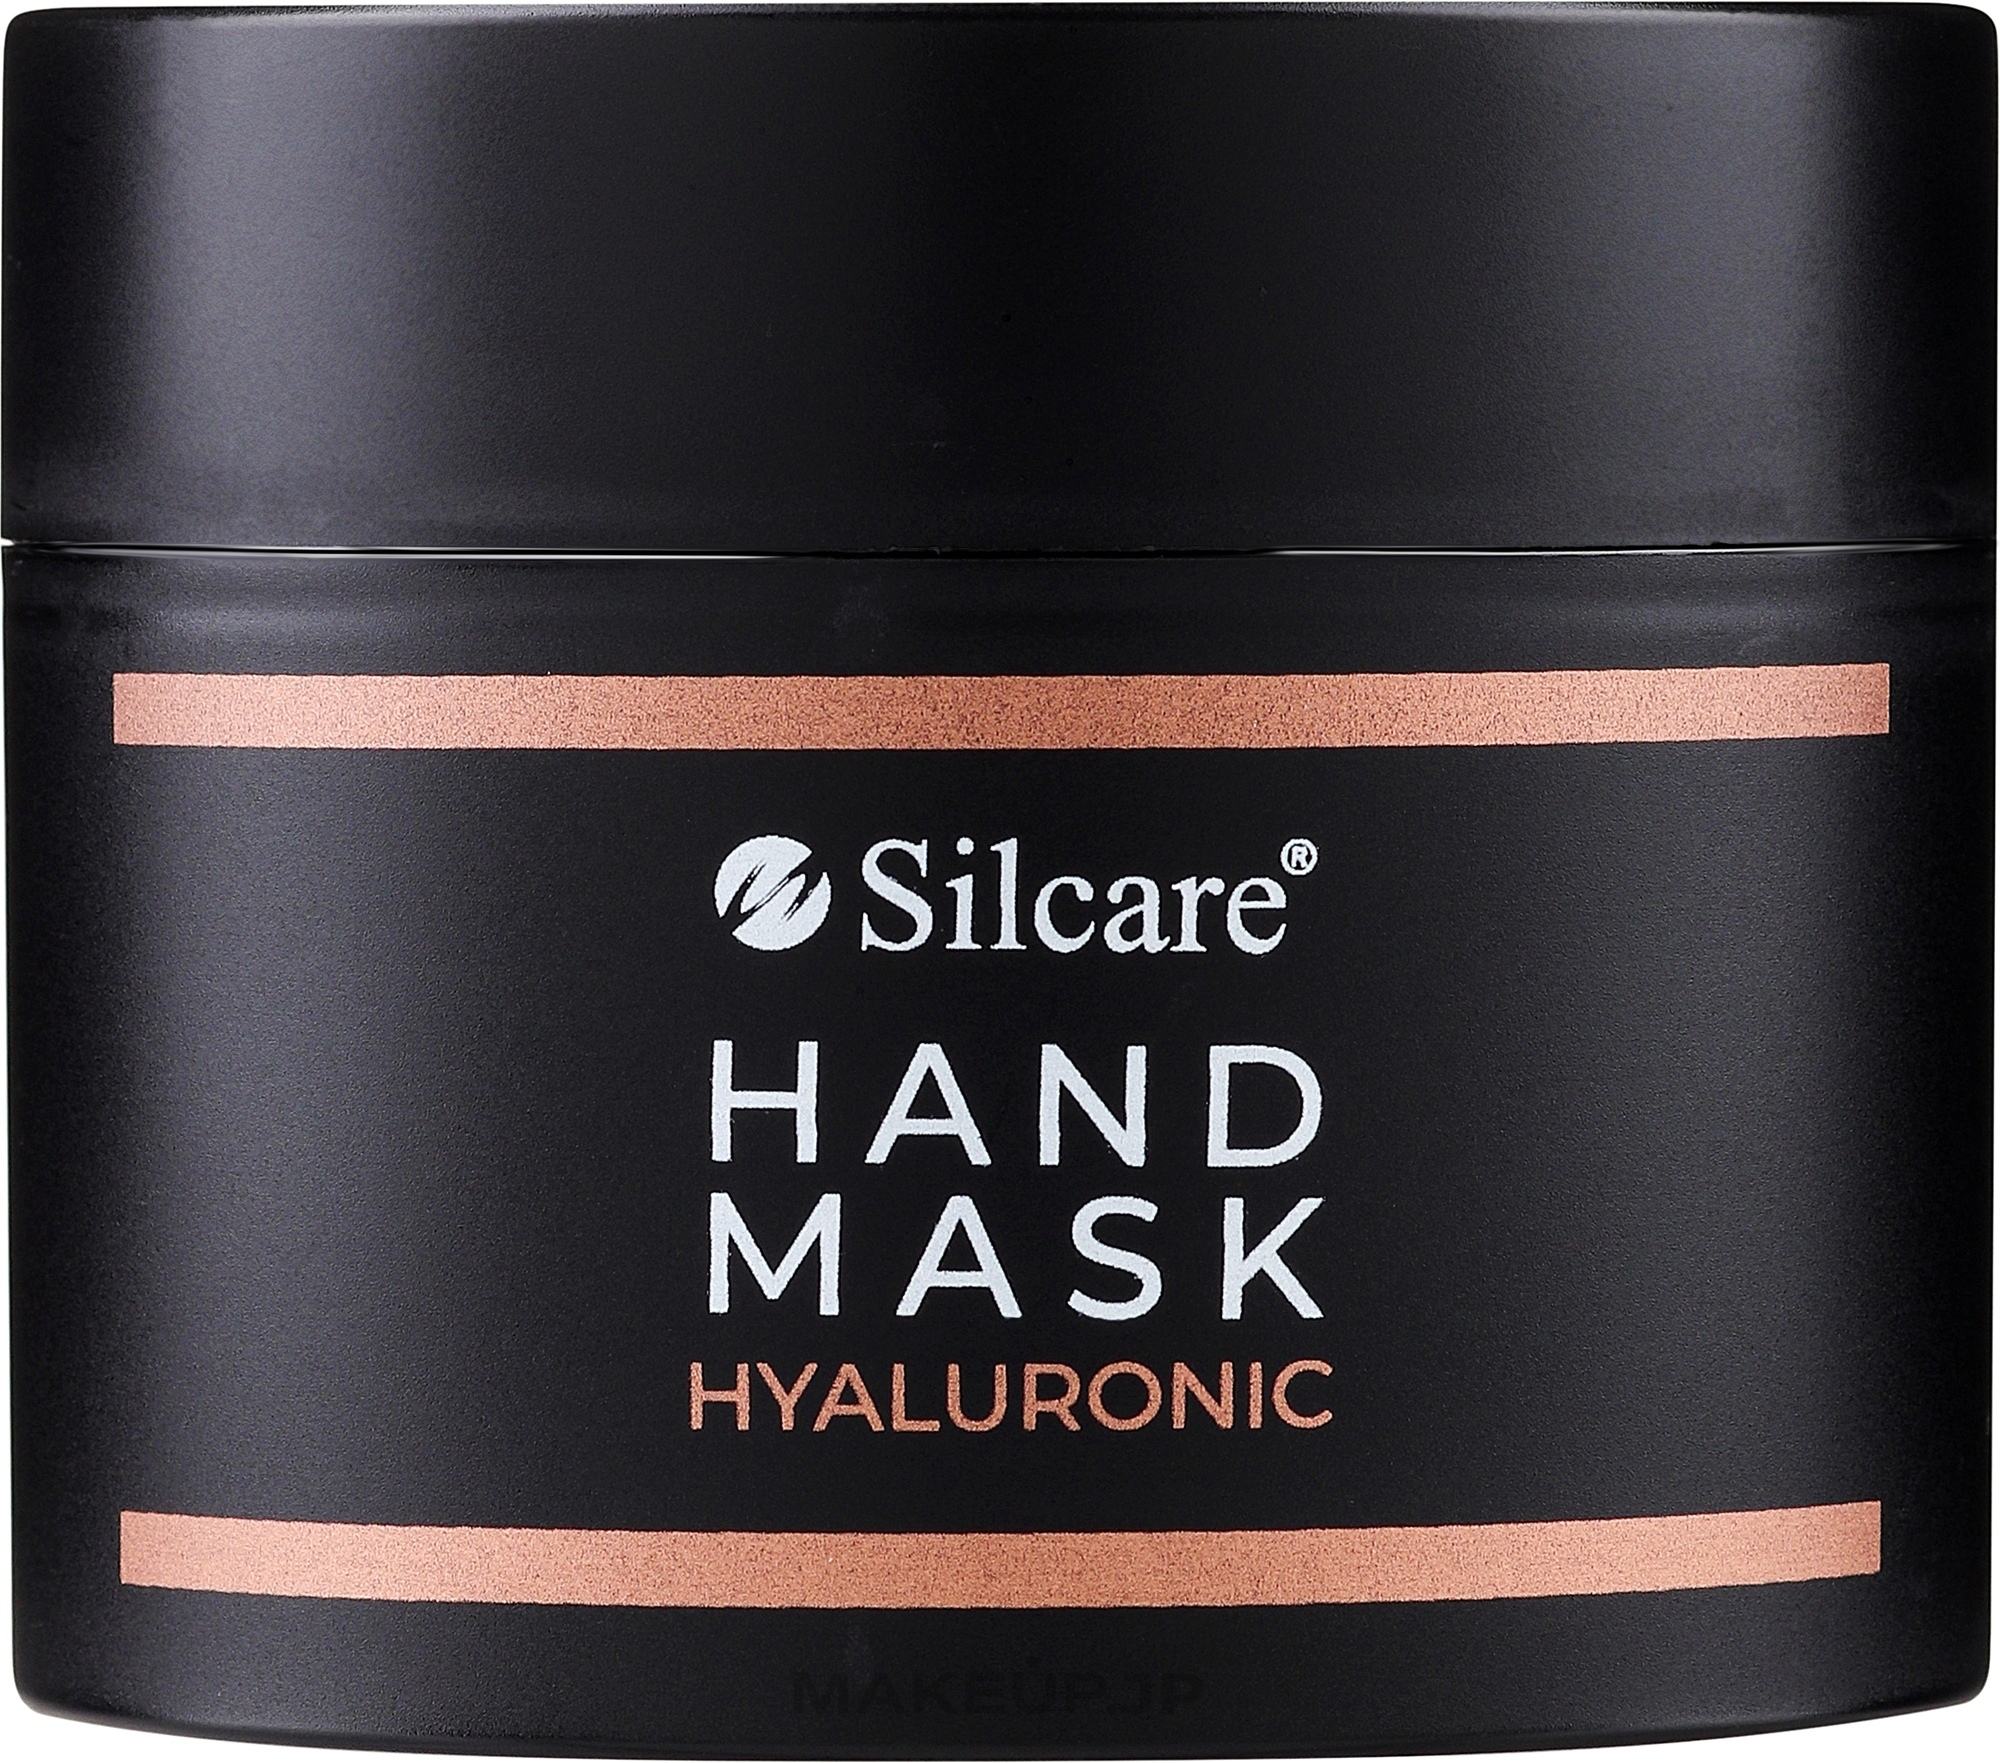 Hand Mask - Silcare So Rose! So Gold! Hyaluronic Hand Mask — photo 150 ml